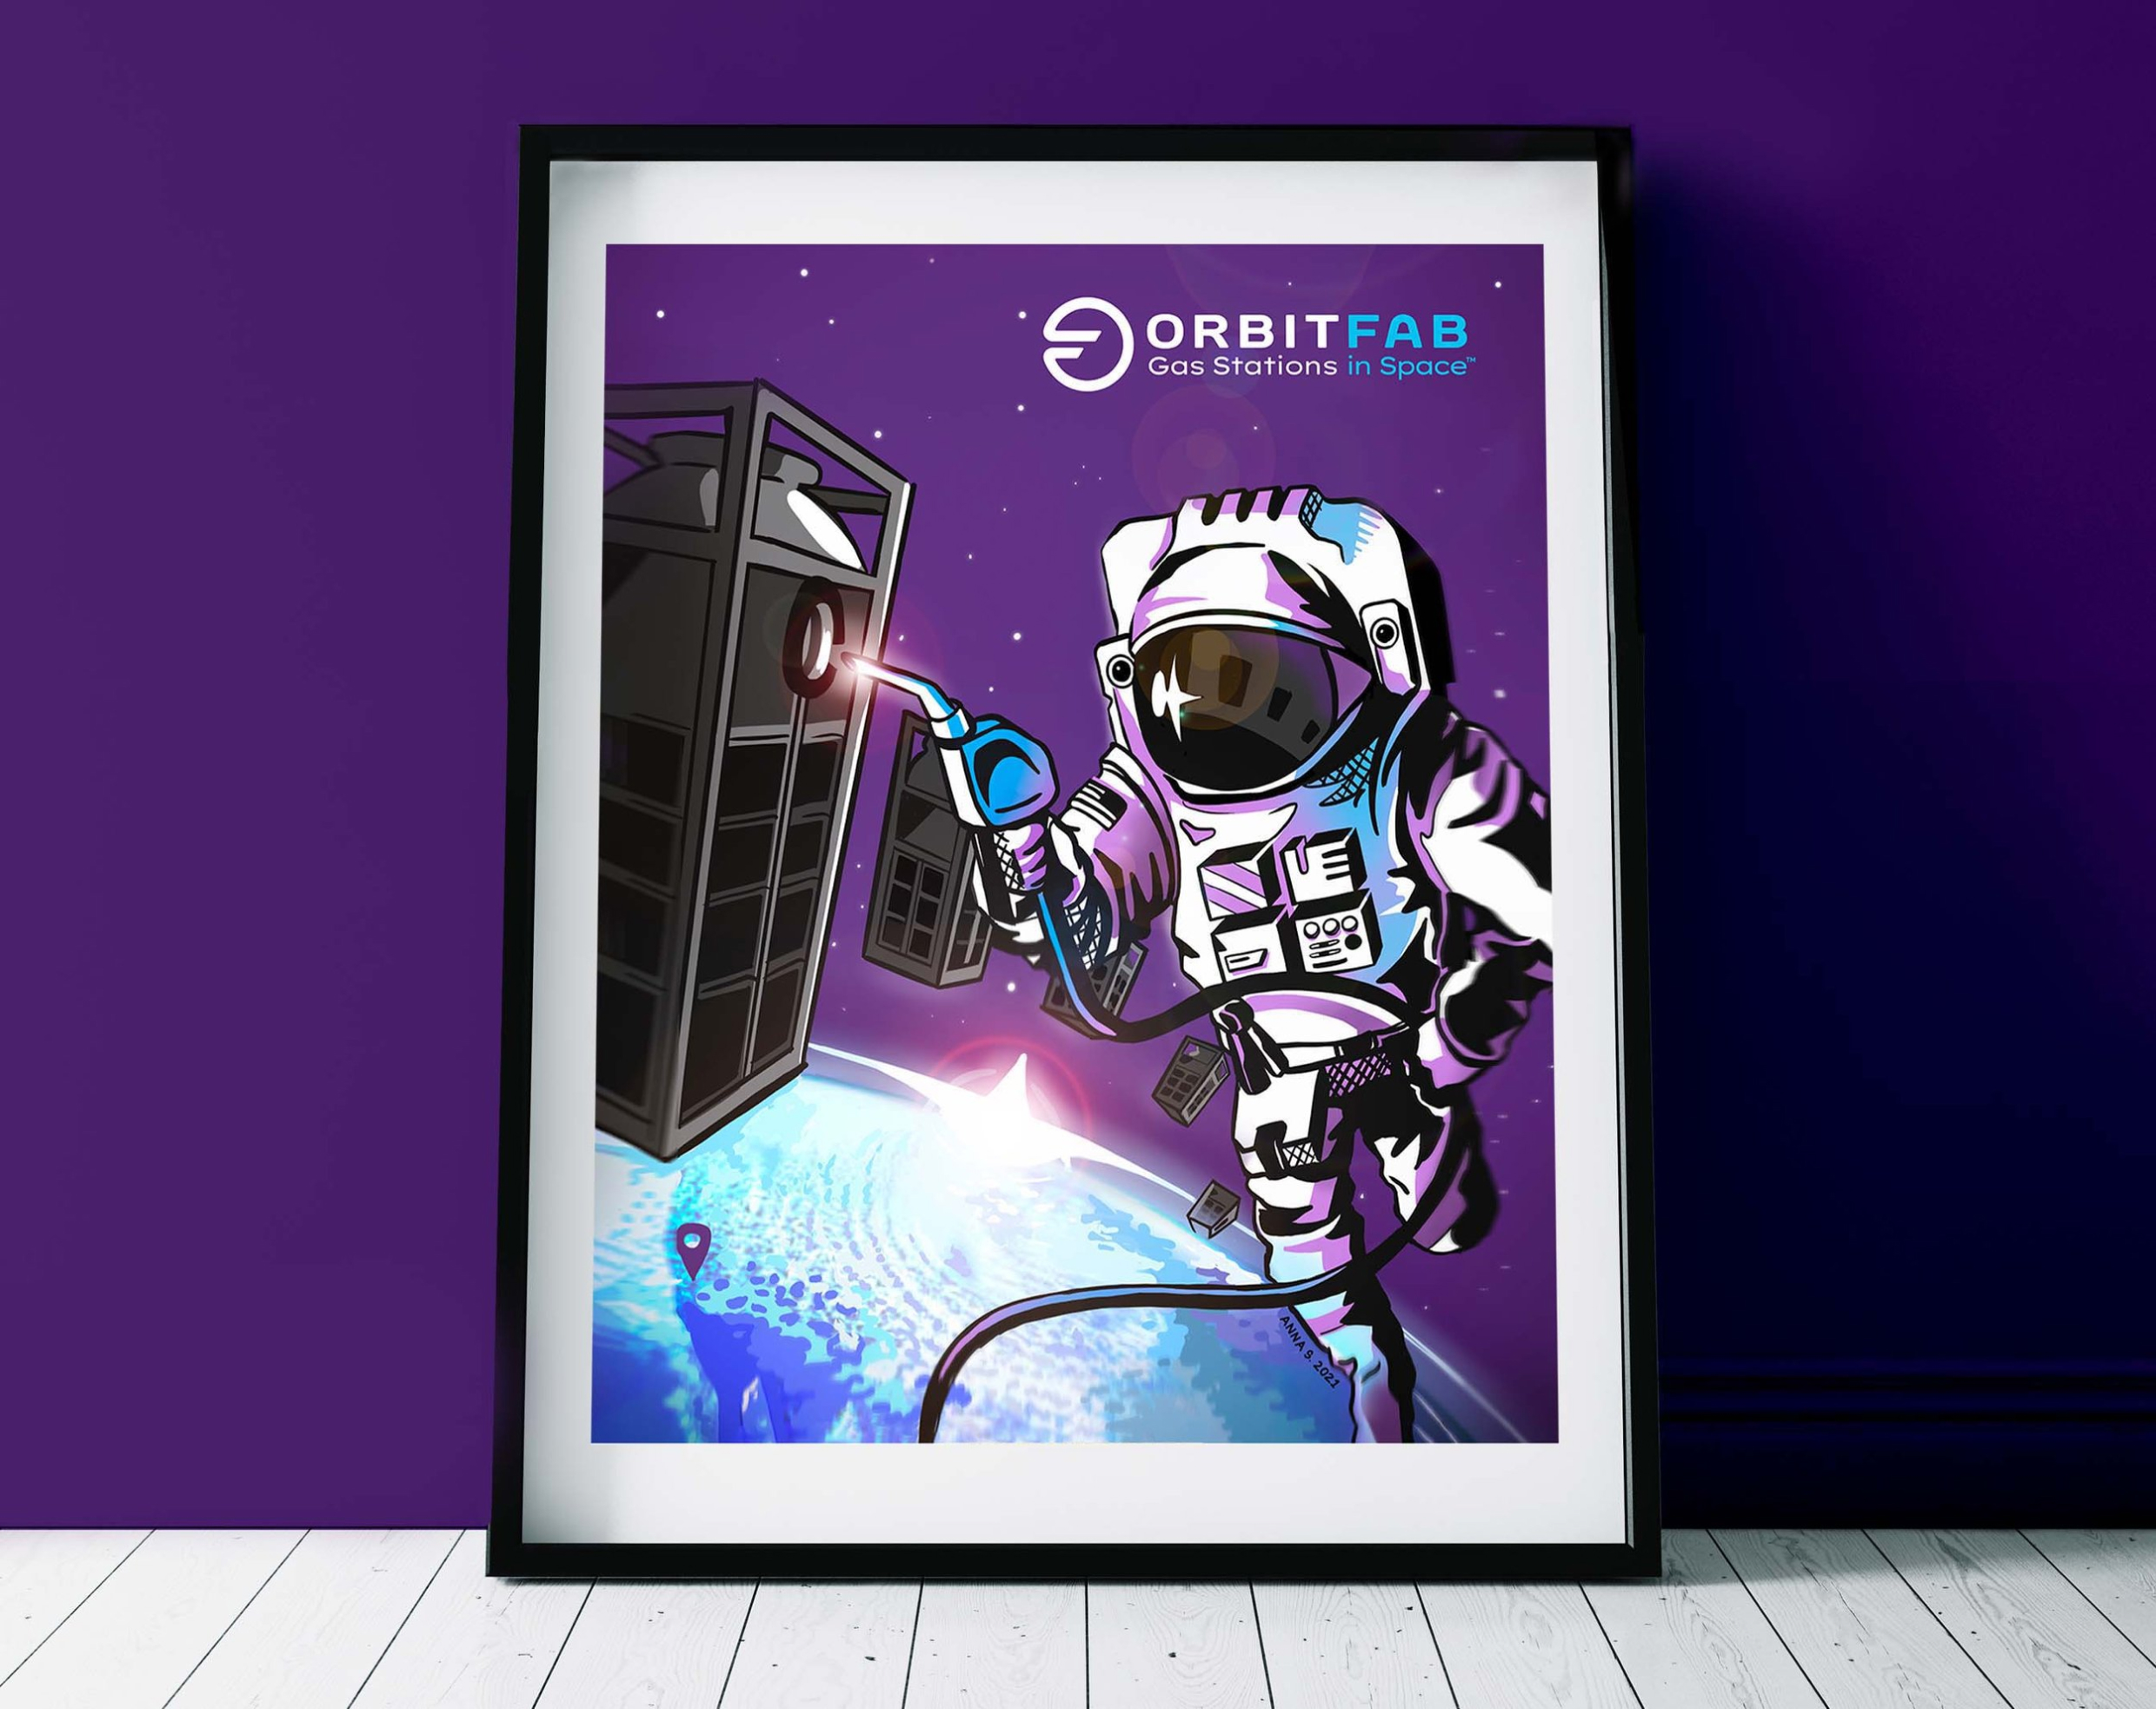 Astro Jockey artwork by Anna Shaposhnik for Orbit Fab is a digital illustration with purple and white and cyan colors that shows an astronaut refueling one tank in an array of tanks floating around Earth. The artwork is framed in a black frame with a white border, and is set on a white planked flooring in front of a purple background.